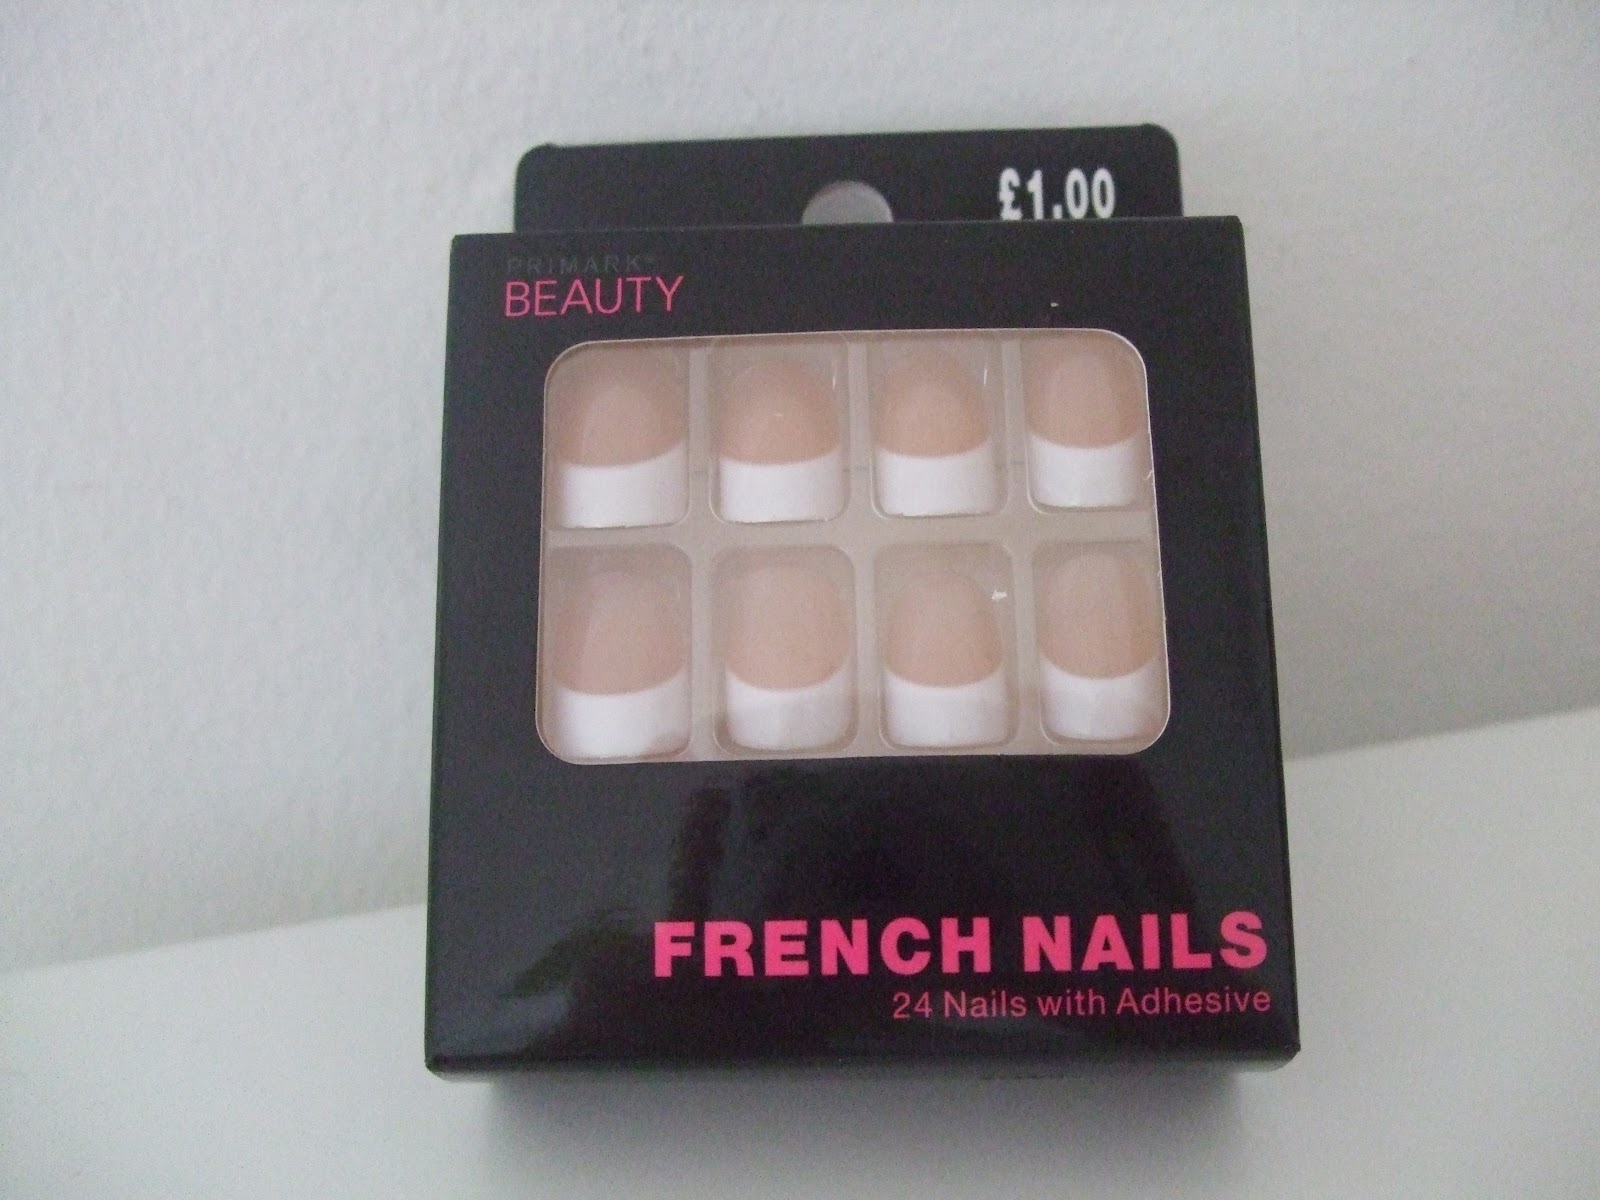 Julz Obsessions Review Primark French Nails